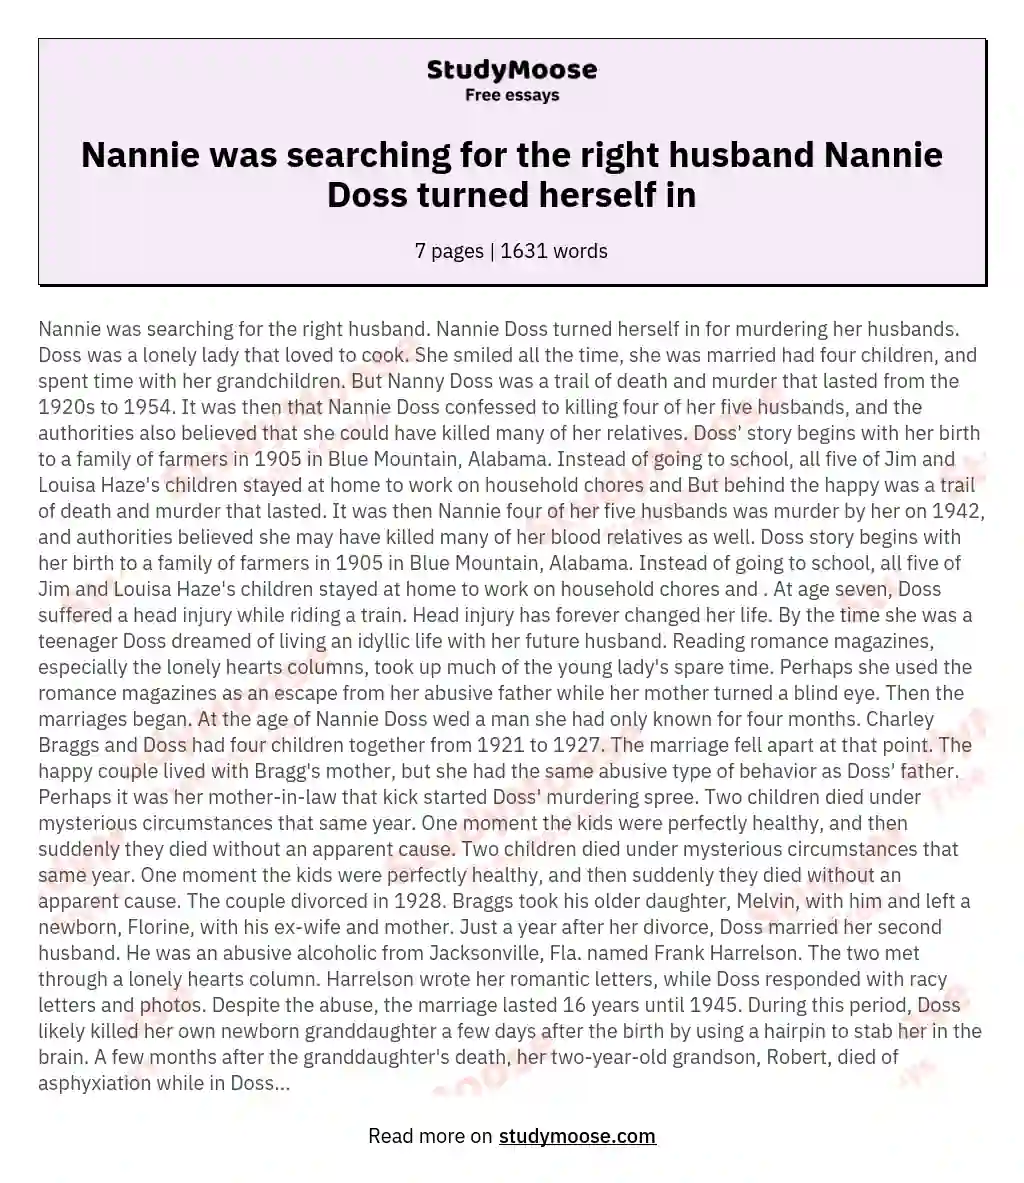 Nannie was searching for the right husband Nannie Doss turned herself in